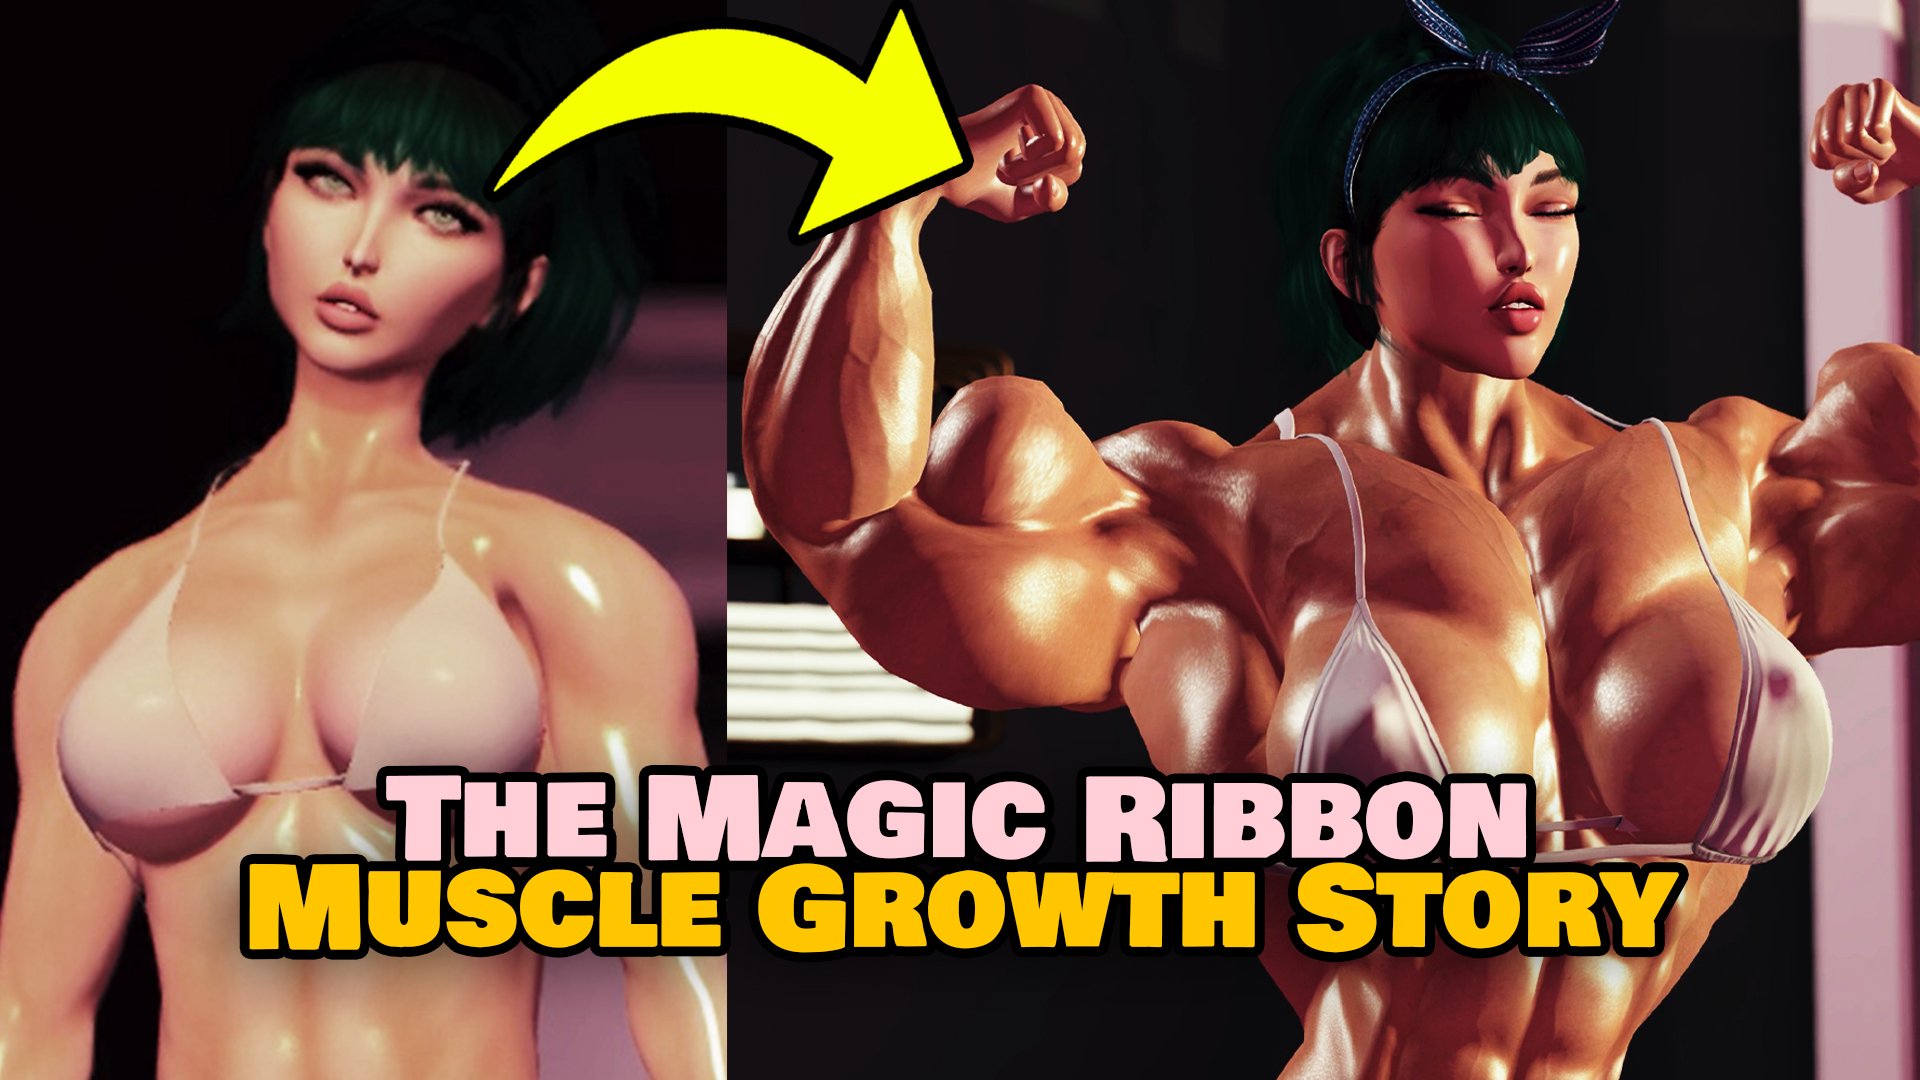 Female Muscle Growth Stories tag luscious